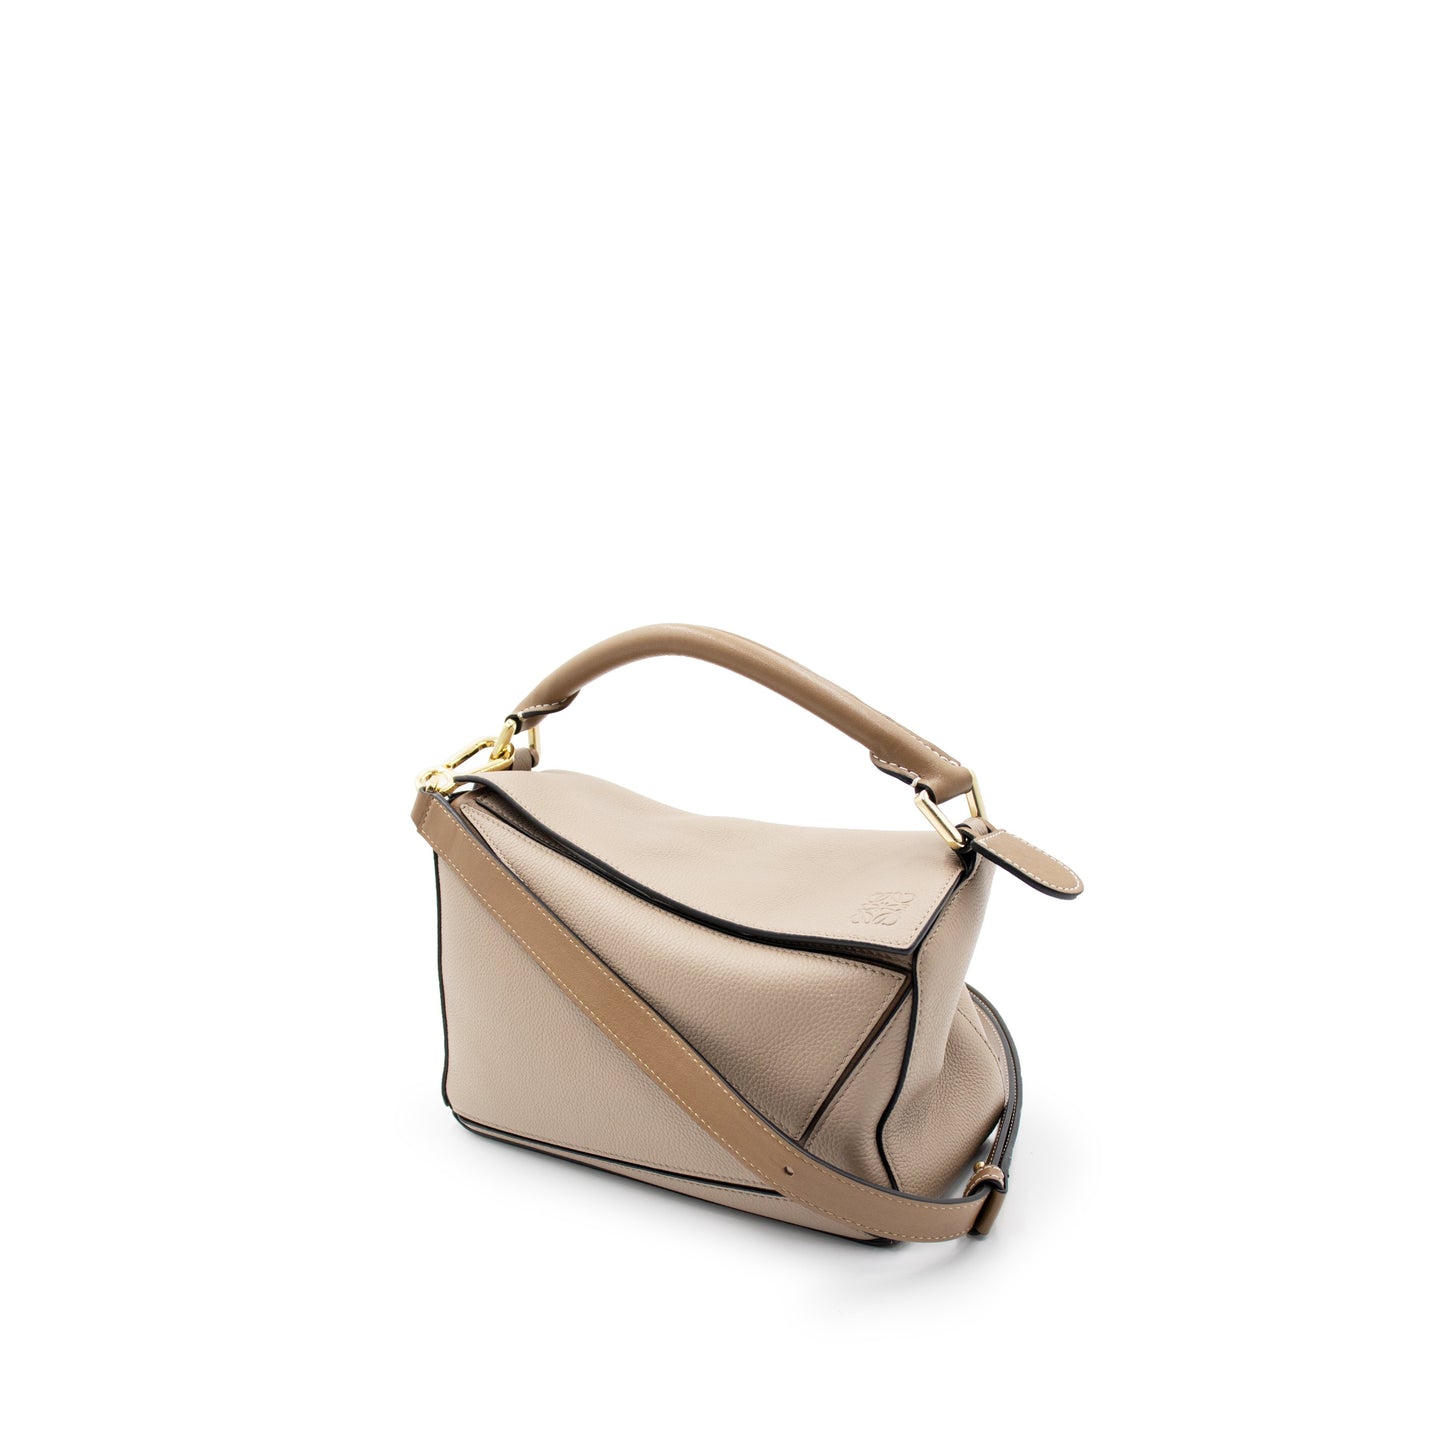 Small Puzzle Bag in Soft Grained Calfskin in Sand/Mink